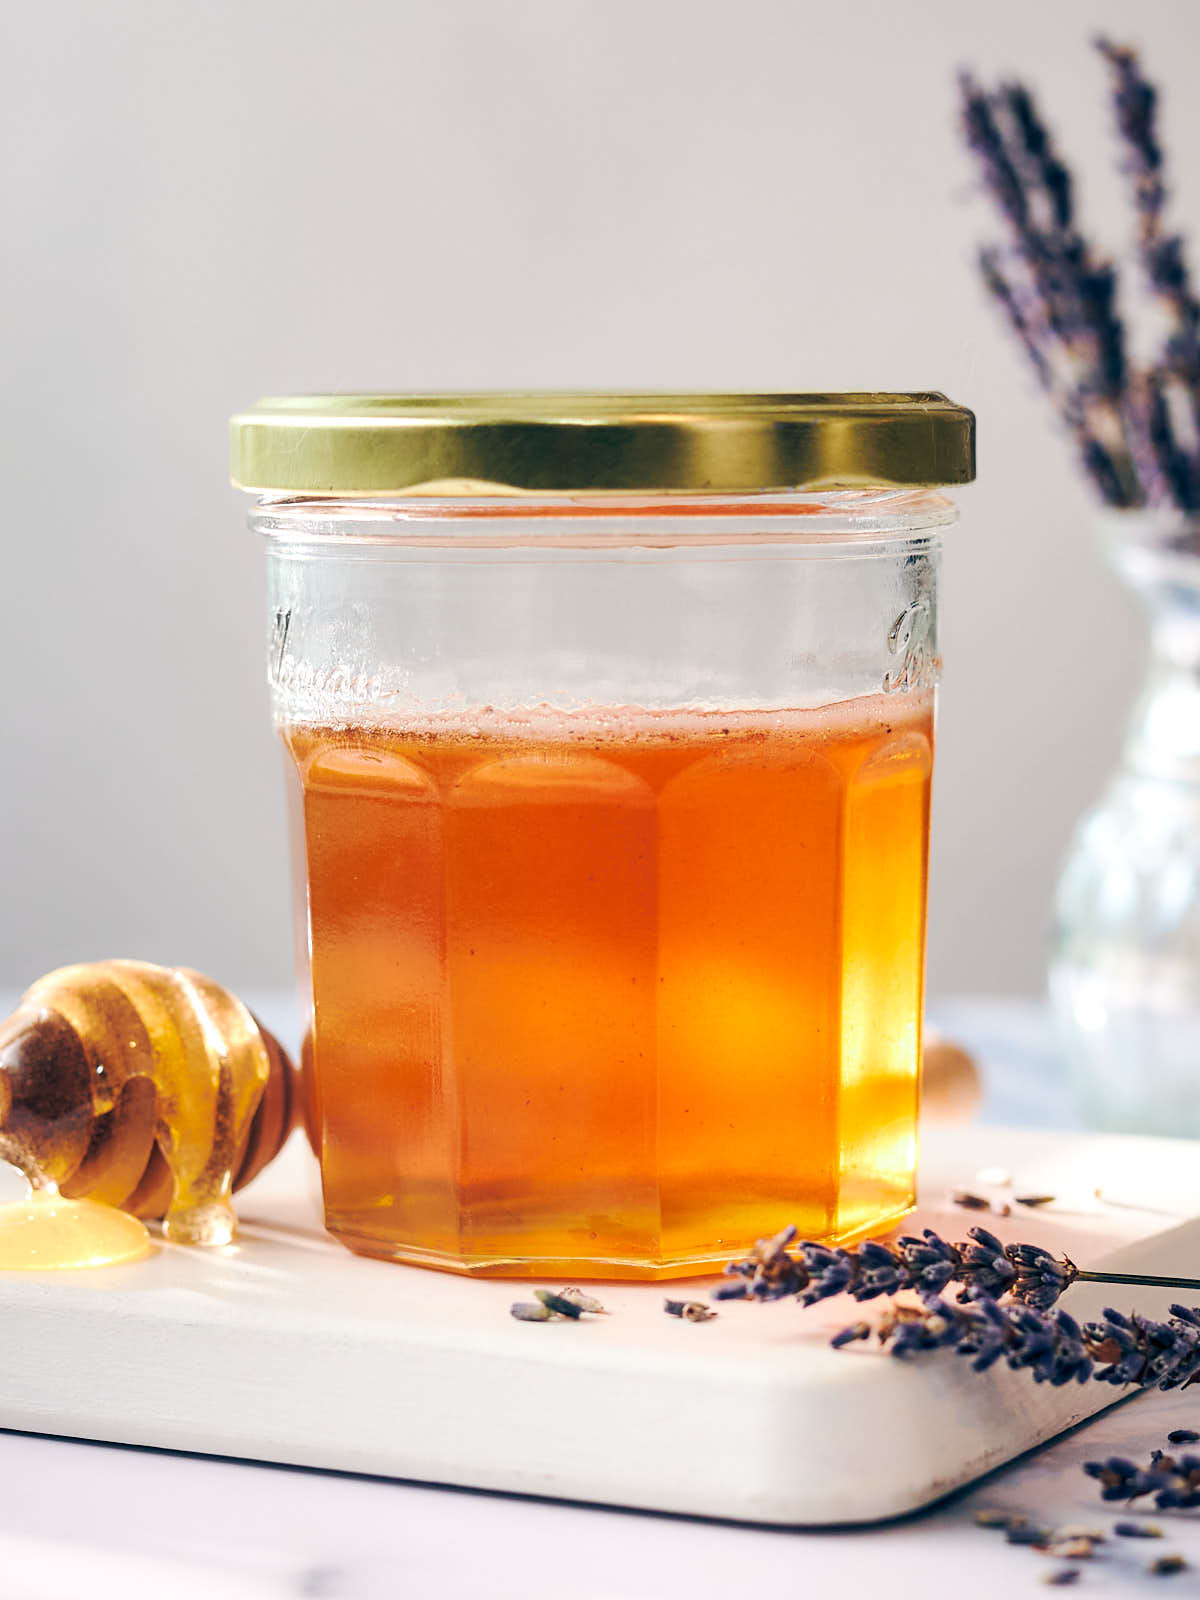 A jar of infused lavender honey with a honey stick and dried lavender blossoms.